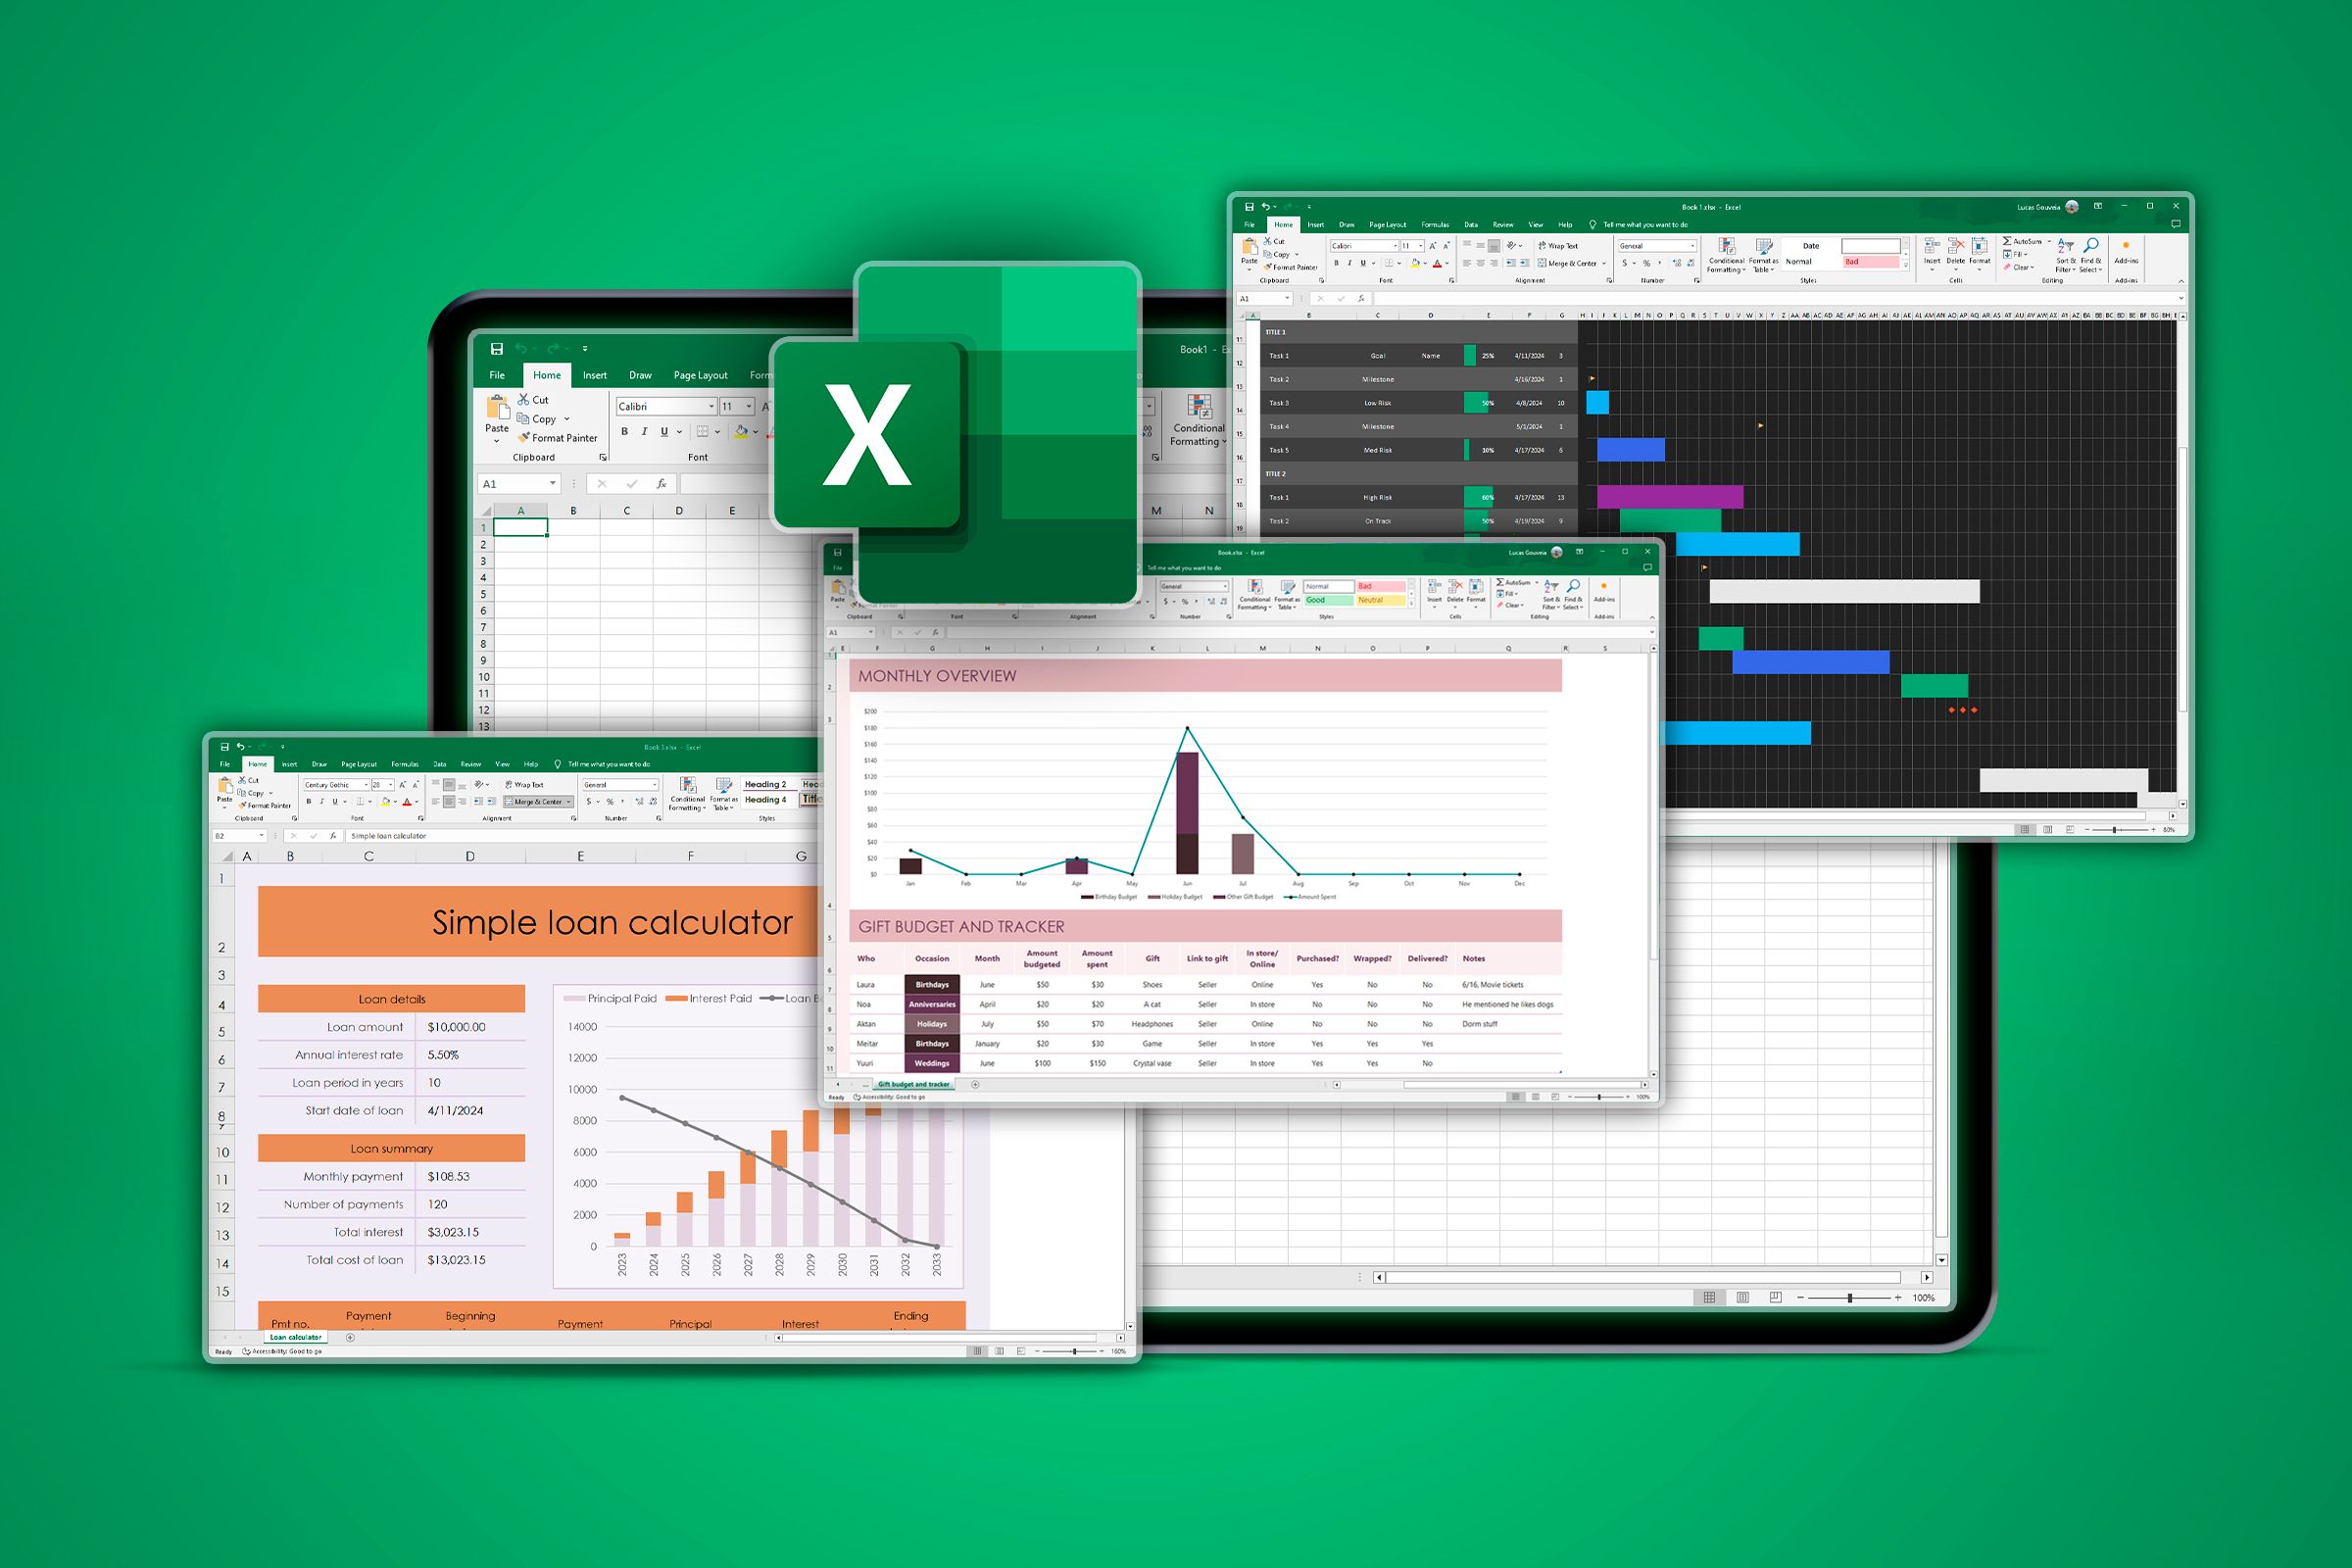 Some Excel screens open showing different types of spreadsheets.